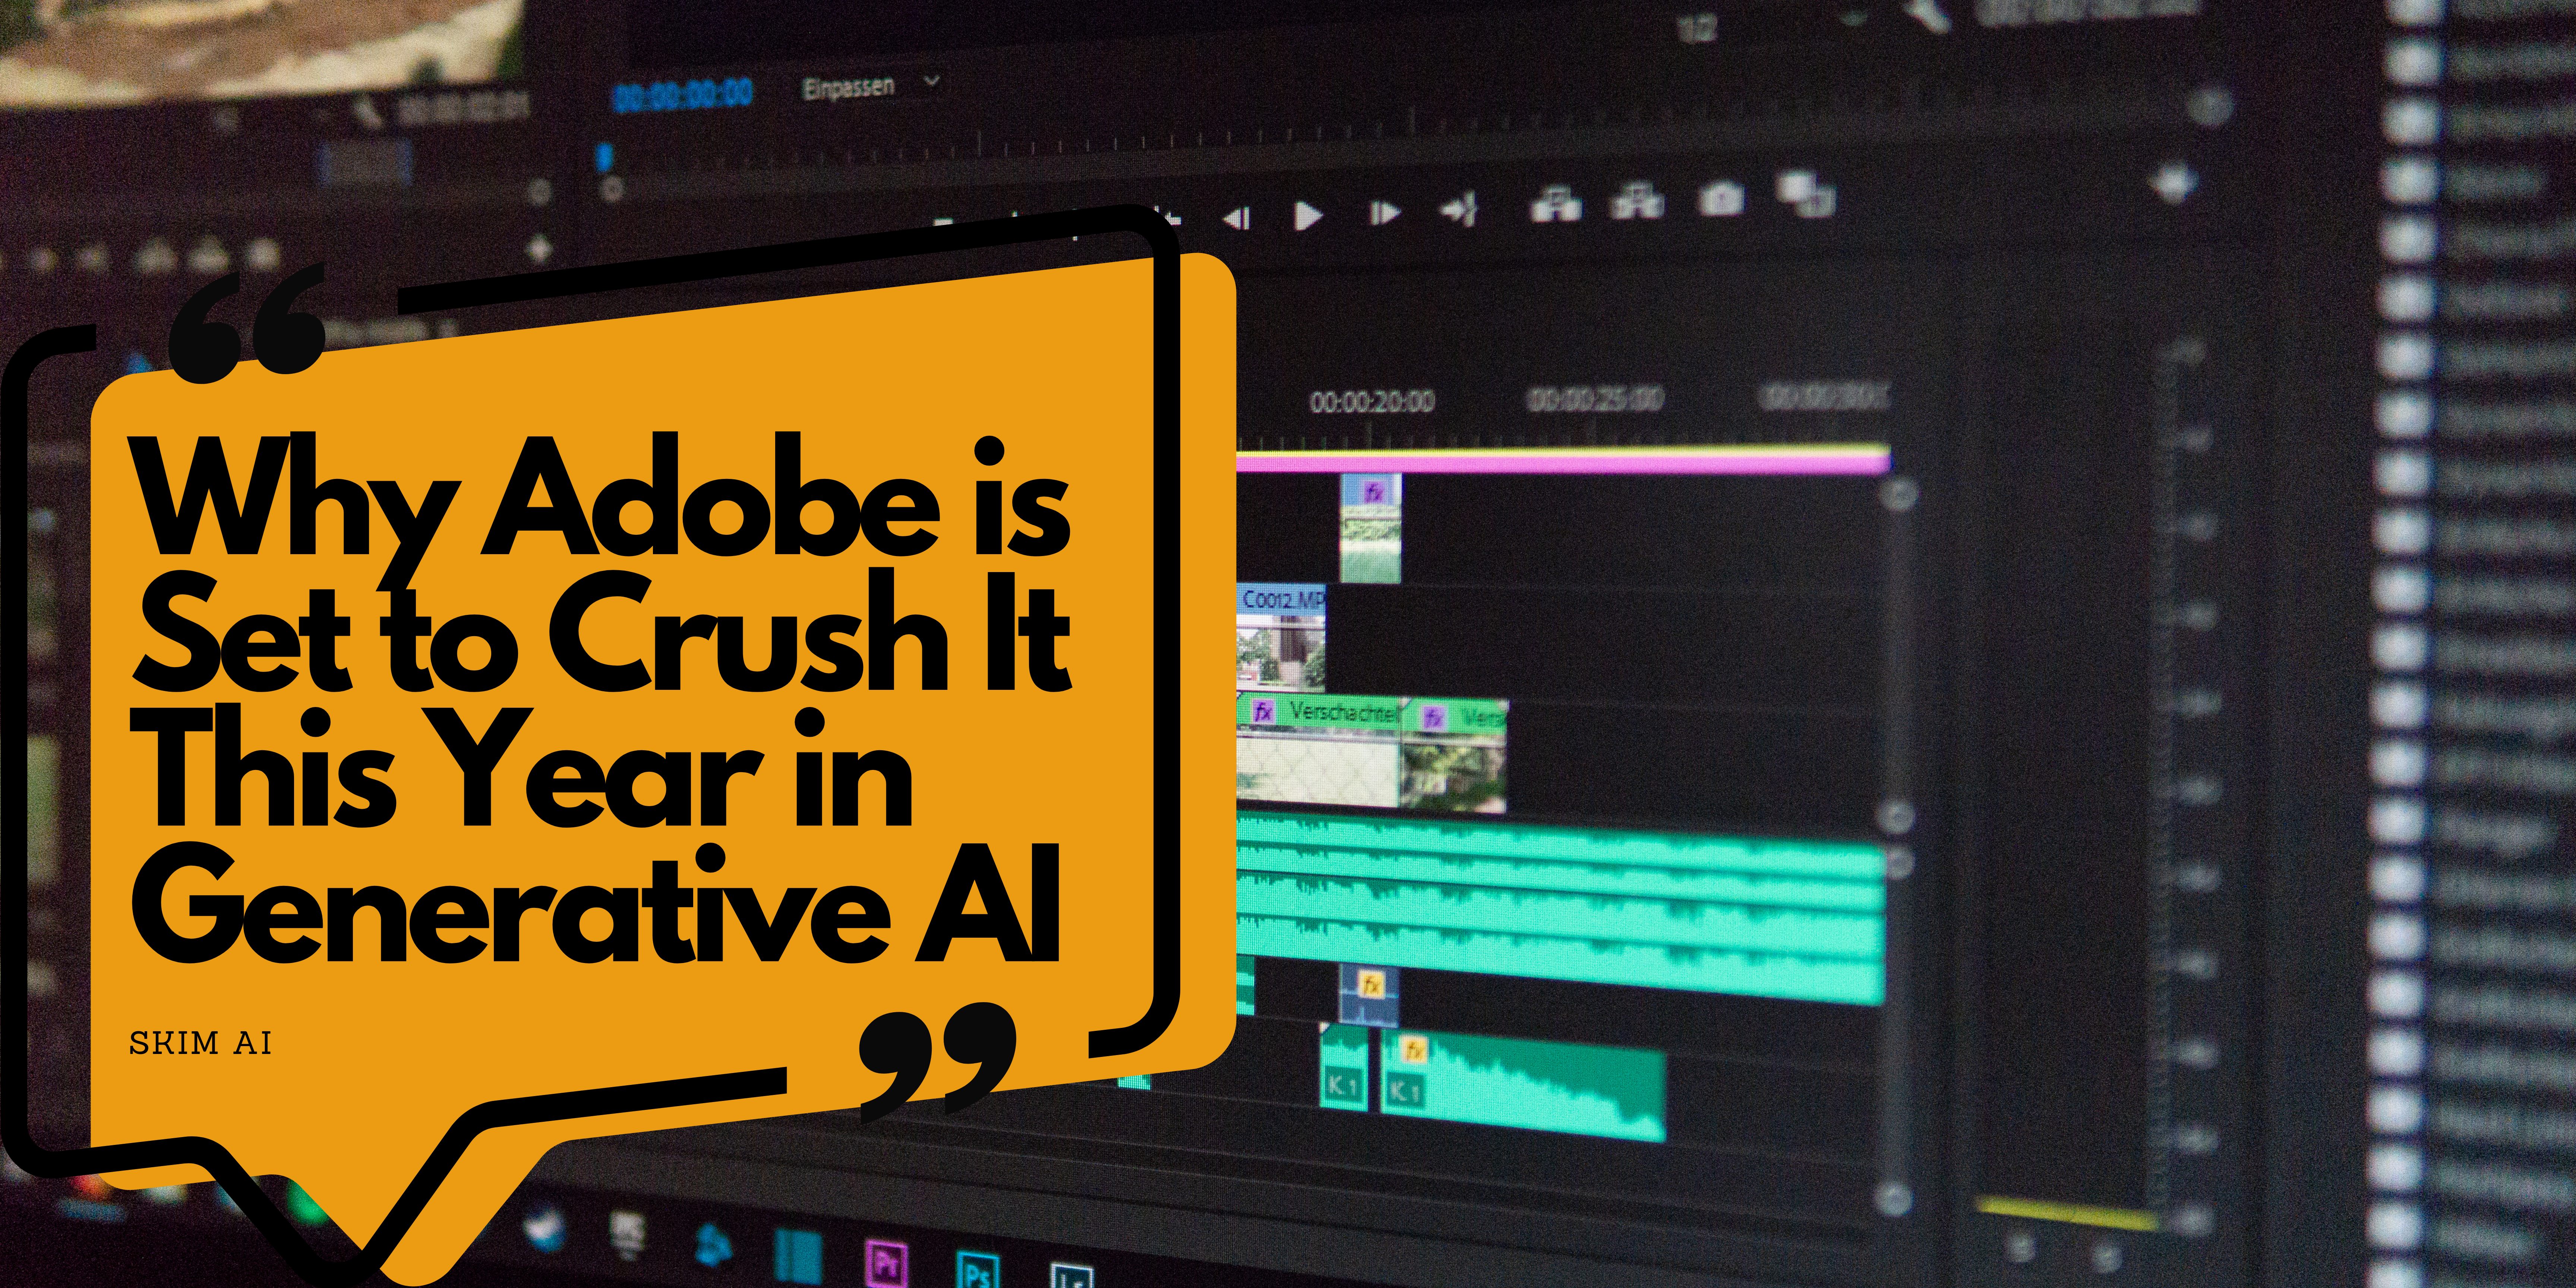 Why Adobe is Set to Crush It This Year: Generative AI, Copyright-Guaranteeing Models, Massive User Base